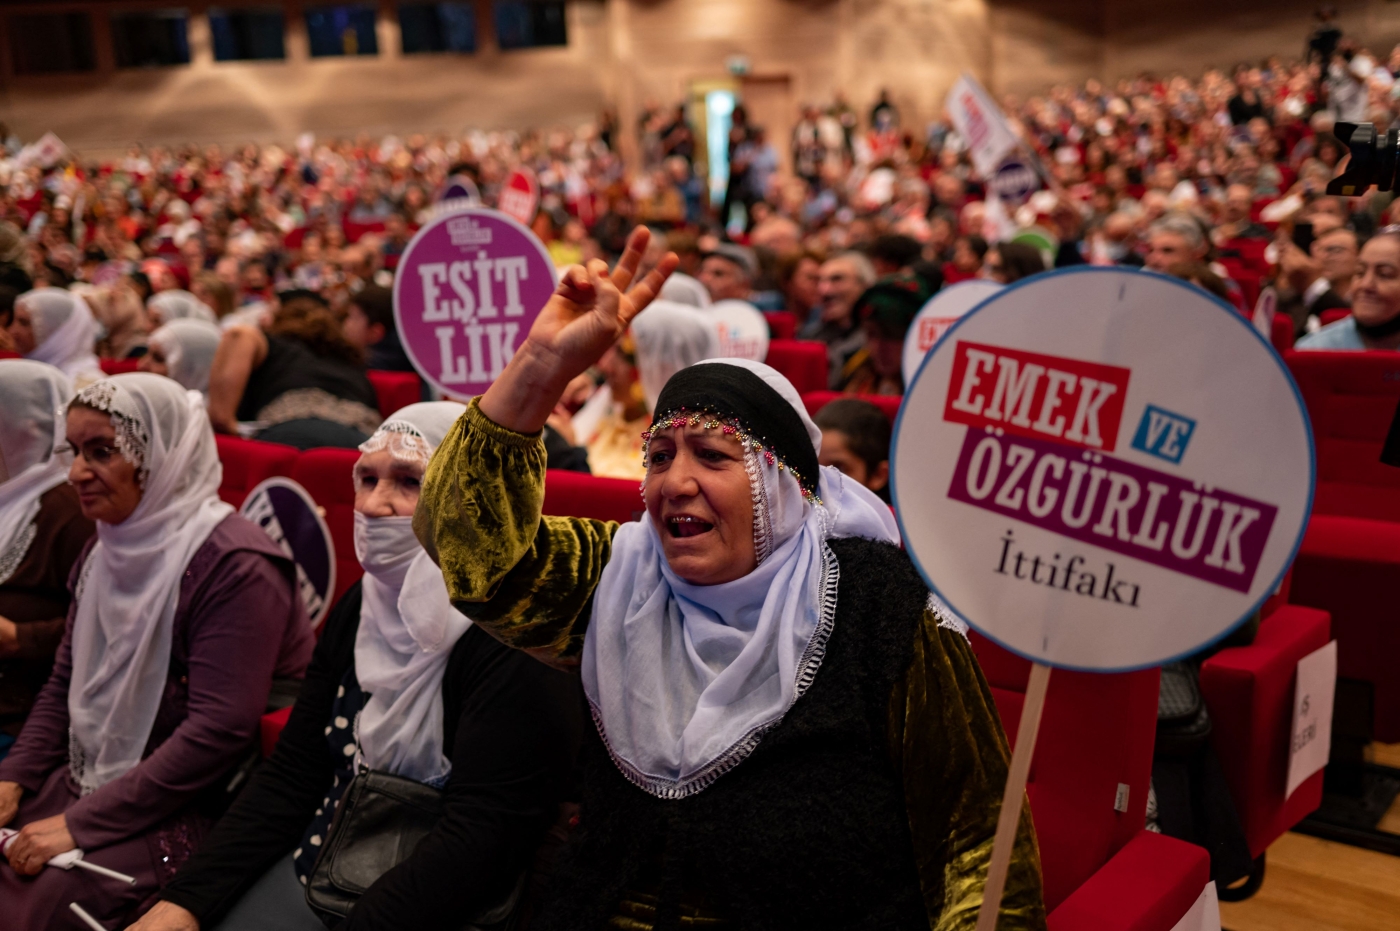 Supporters attend a congress to launch the "Labour and Freedom Alliance", a six party coalition led by the HDP, in Istanbul on September 24, 2022 (AFP)